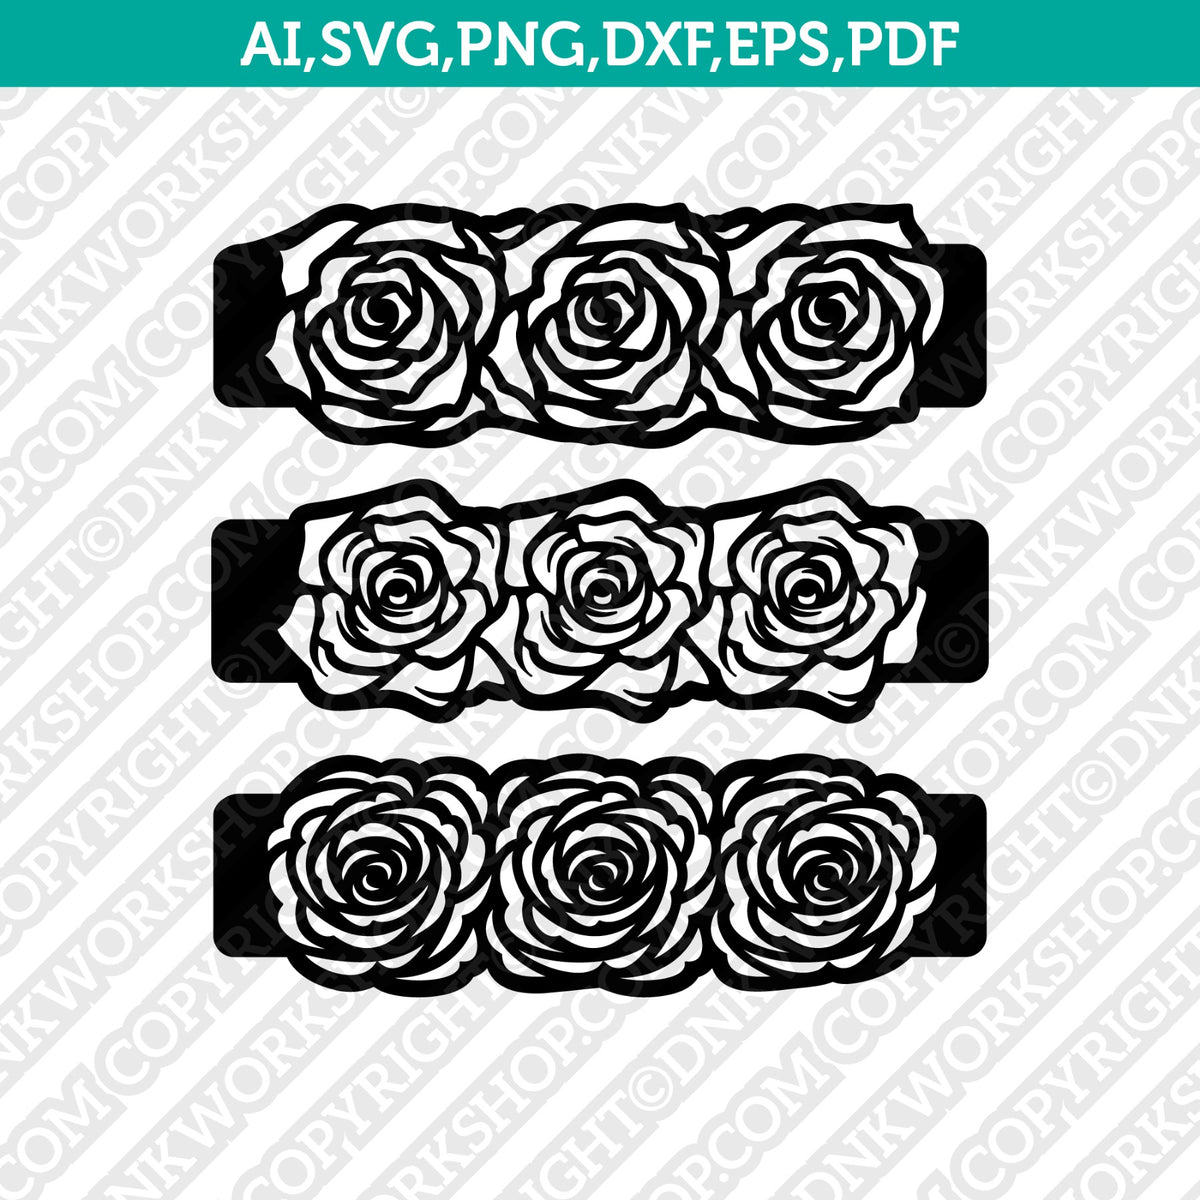 Roses with leaves border svg dxf cut out laser cricut files By